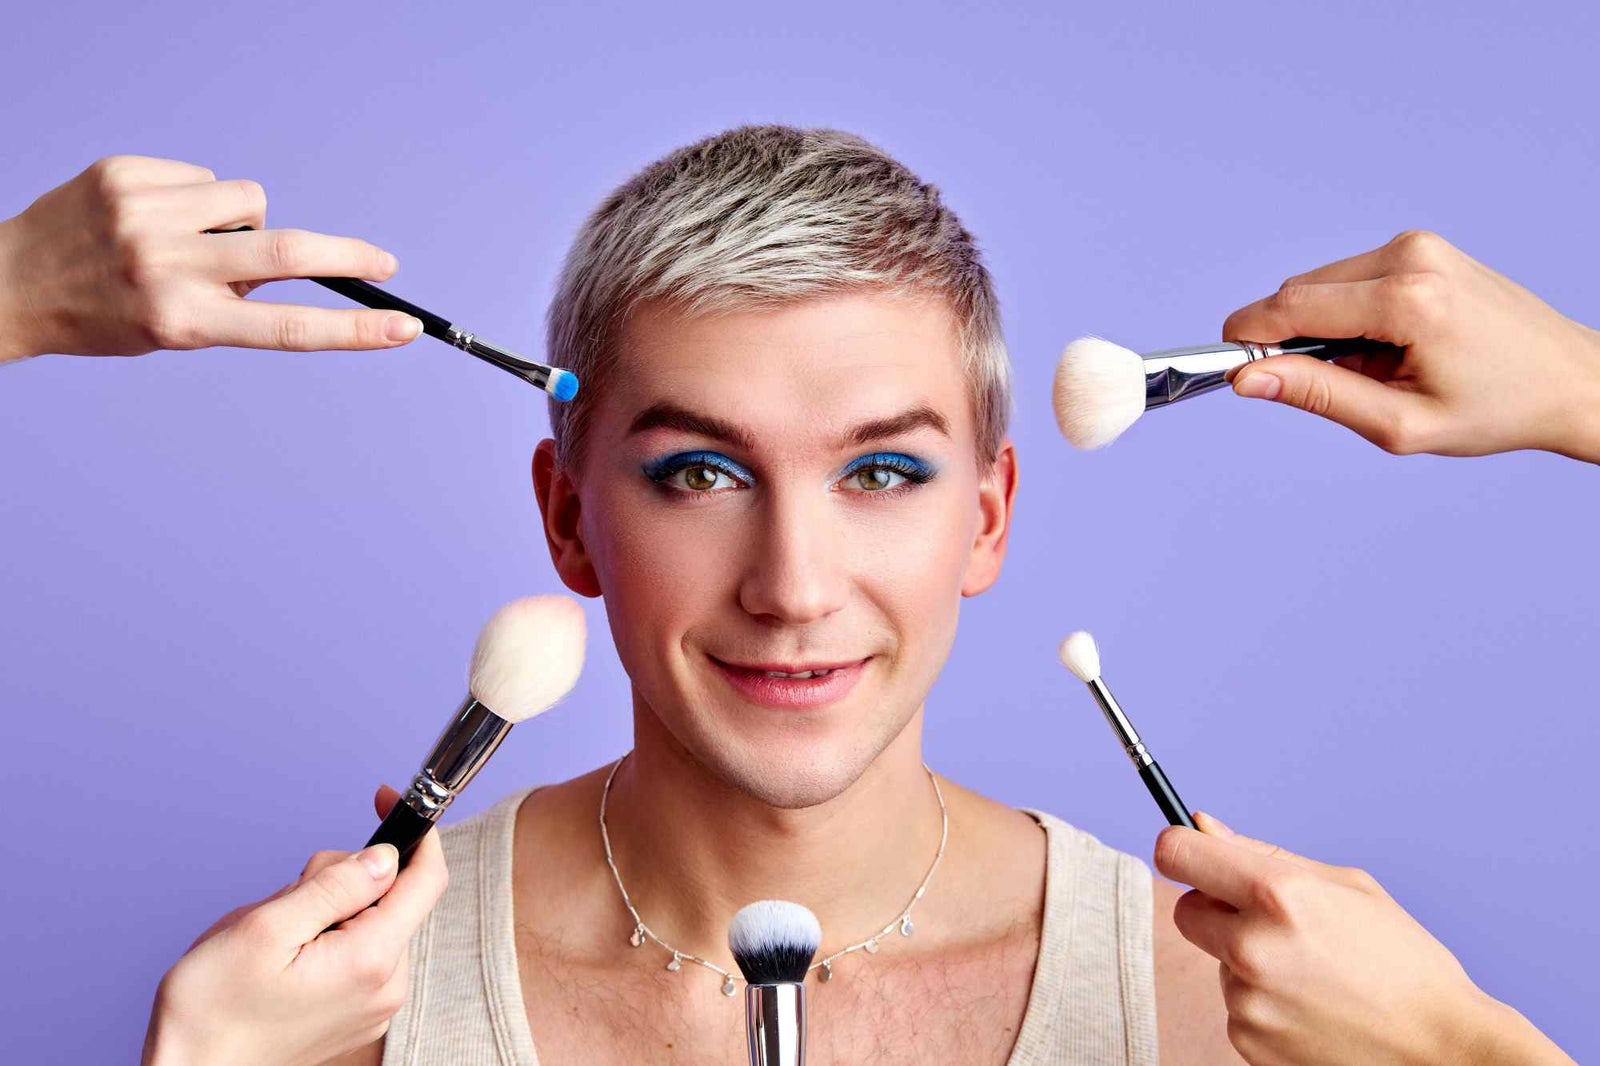 Makeup tips for a man looking to create a convincing man-to-woman transformation: